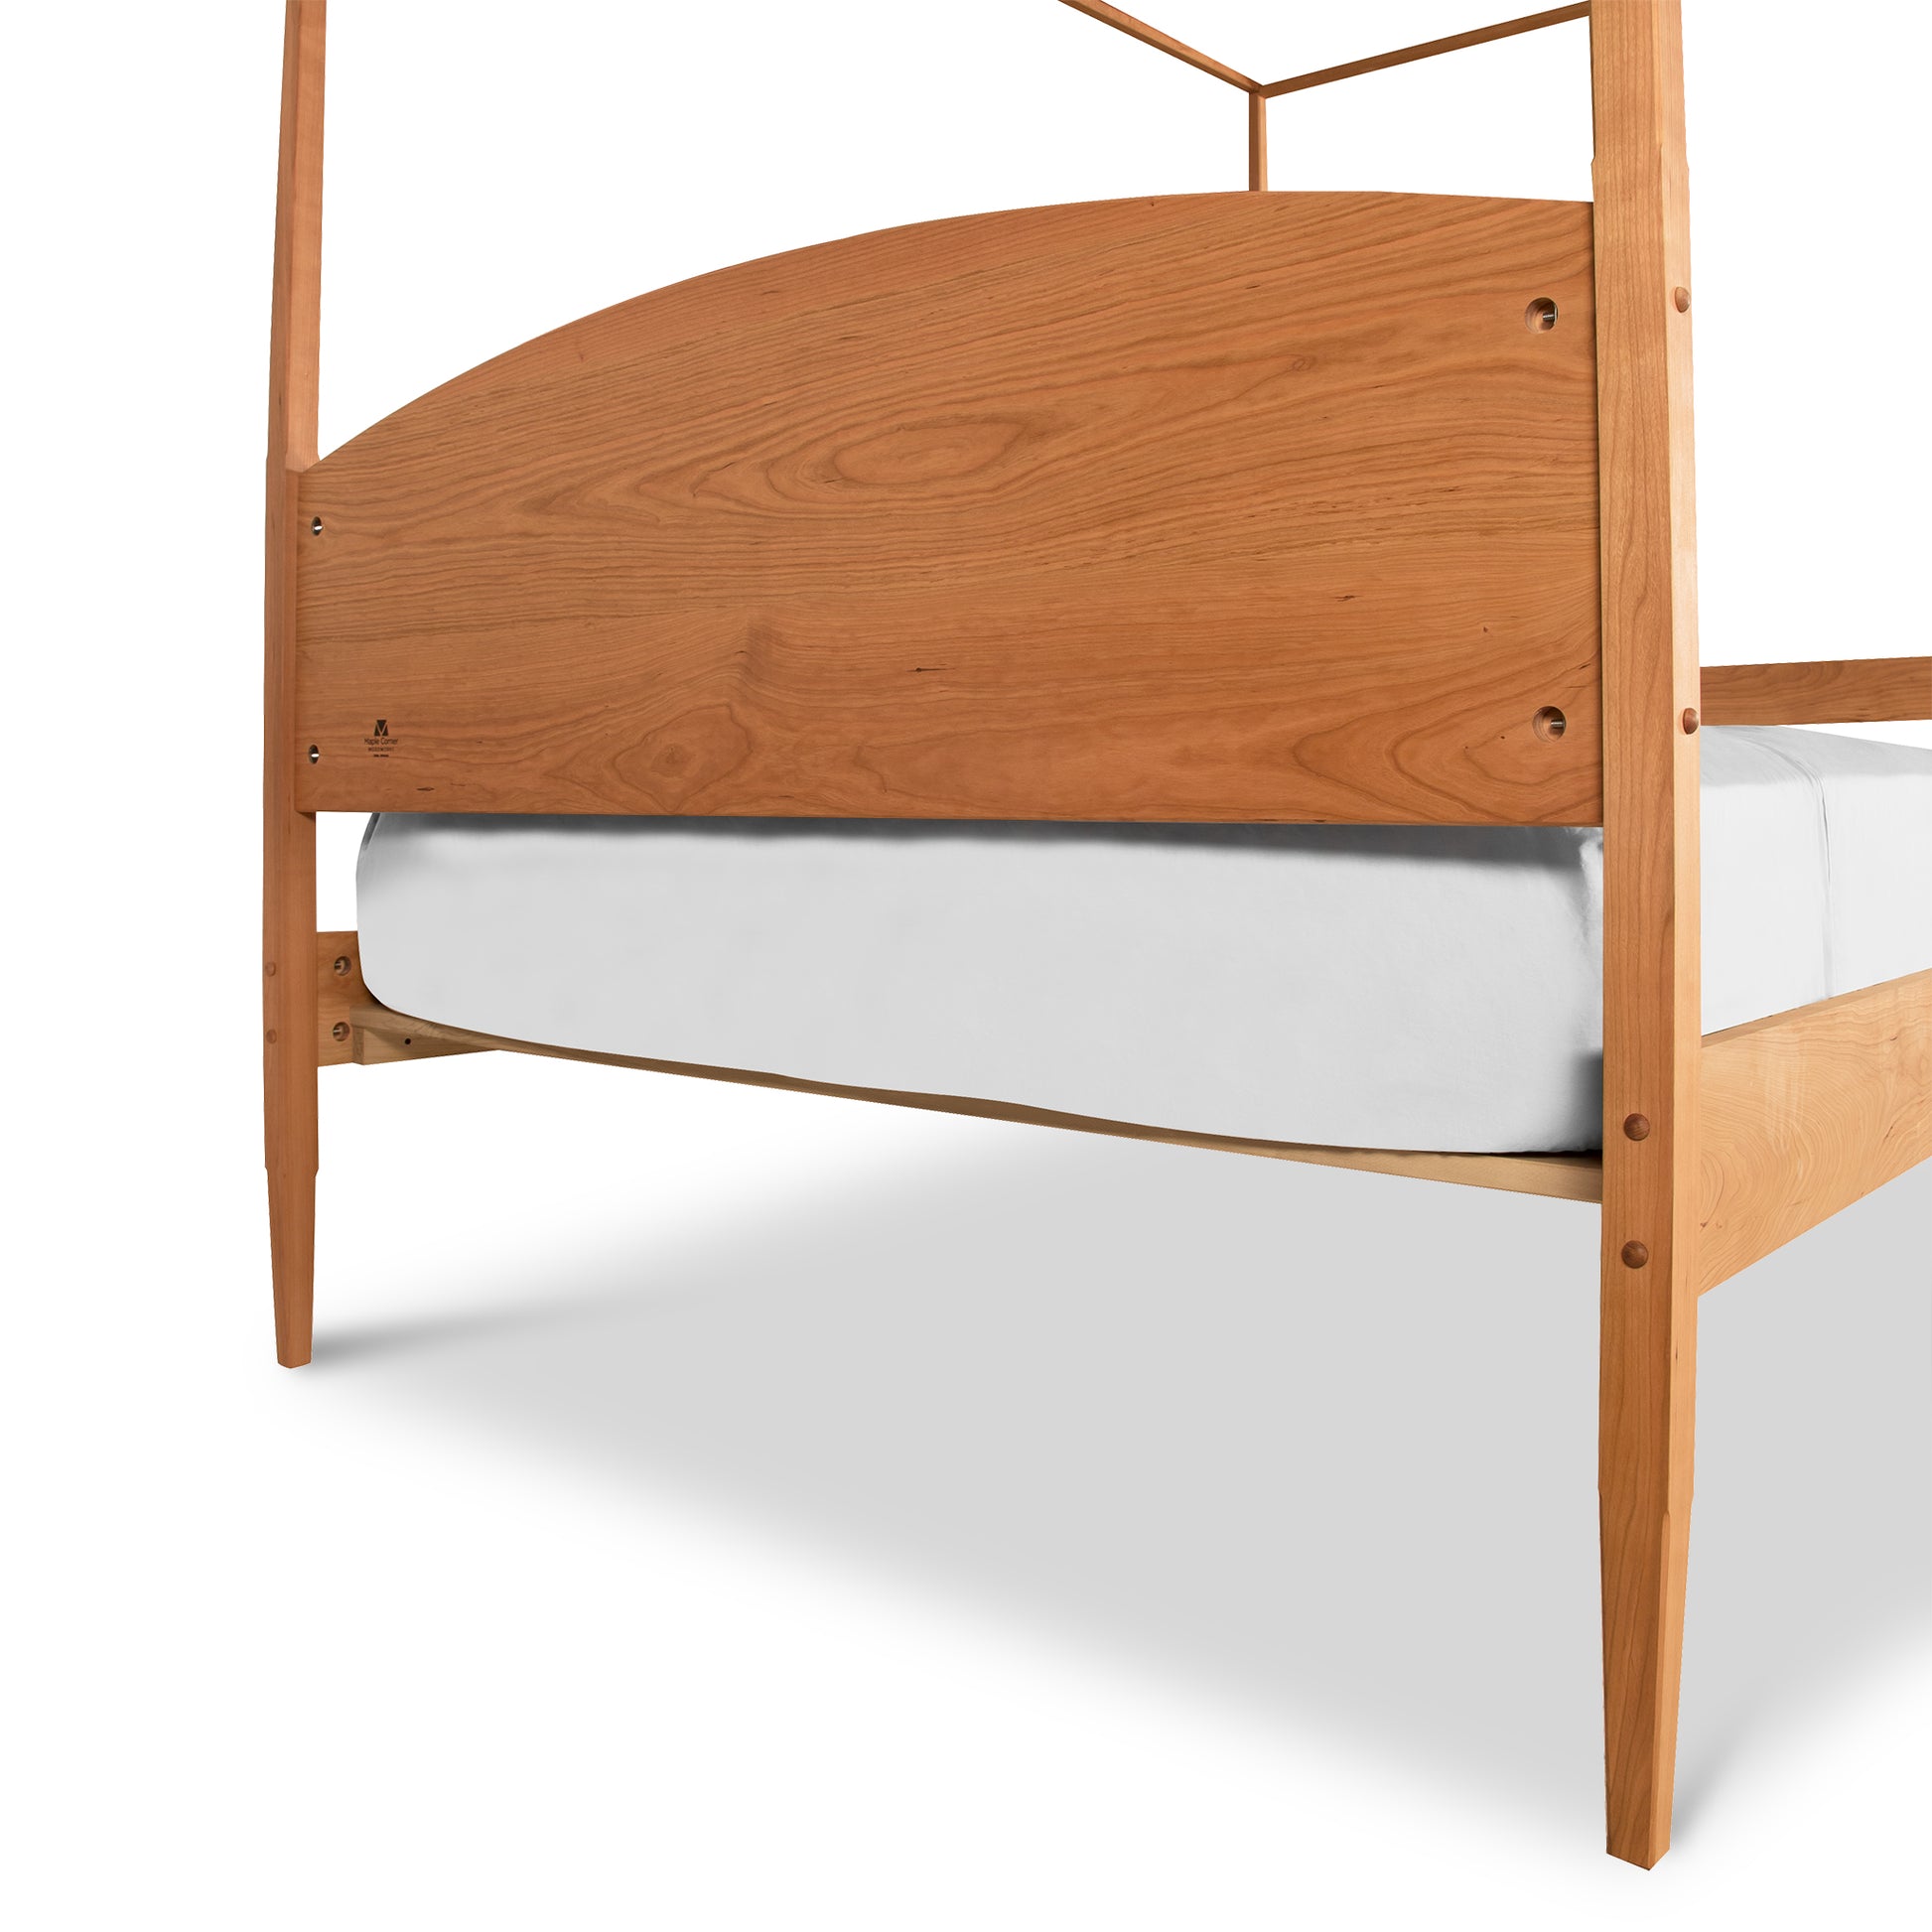 A Maple Corner Woodworks Vermont Shaker Four Poster Bed featuring a curved headboard with a visible grain pattern, supporting a white mattress. The structure shows simple, modern craftsmanship.